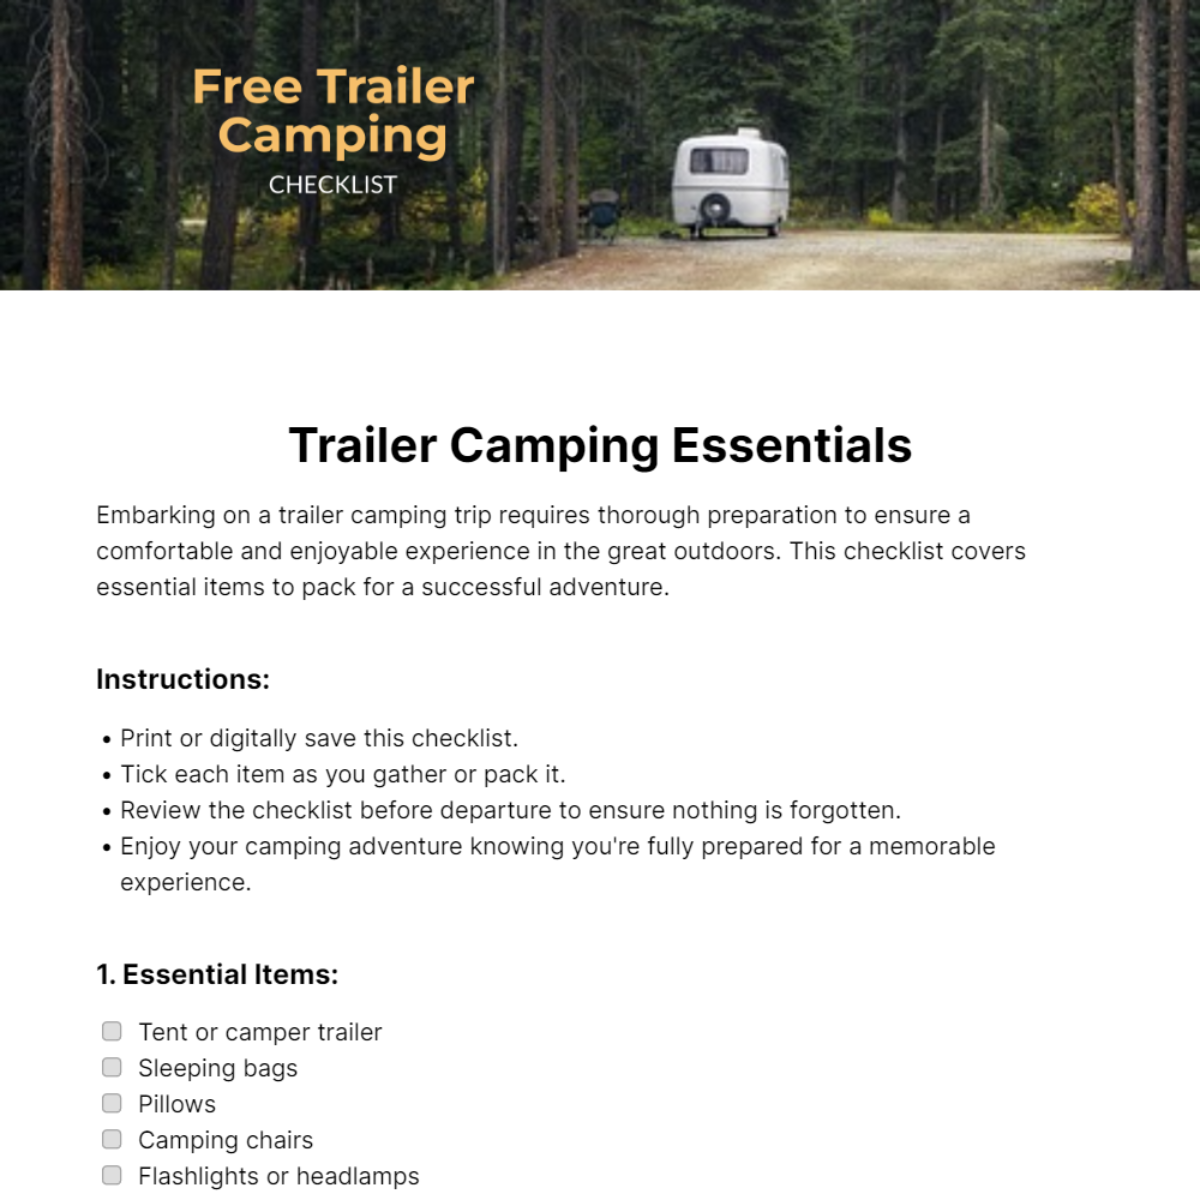 Free Trailer Camping Checklist Template